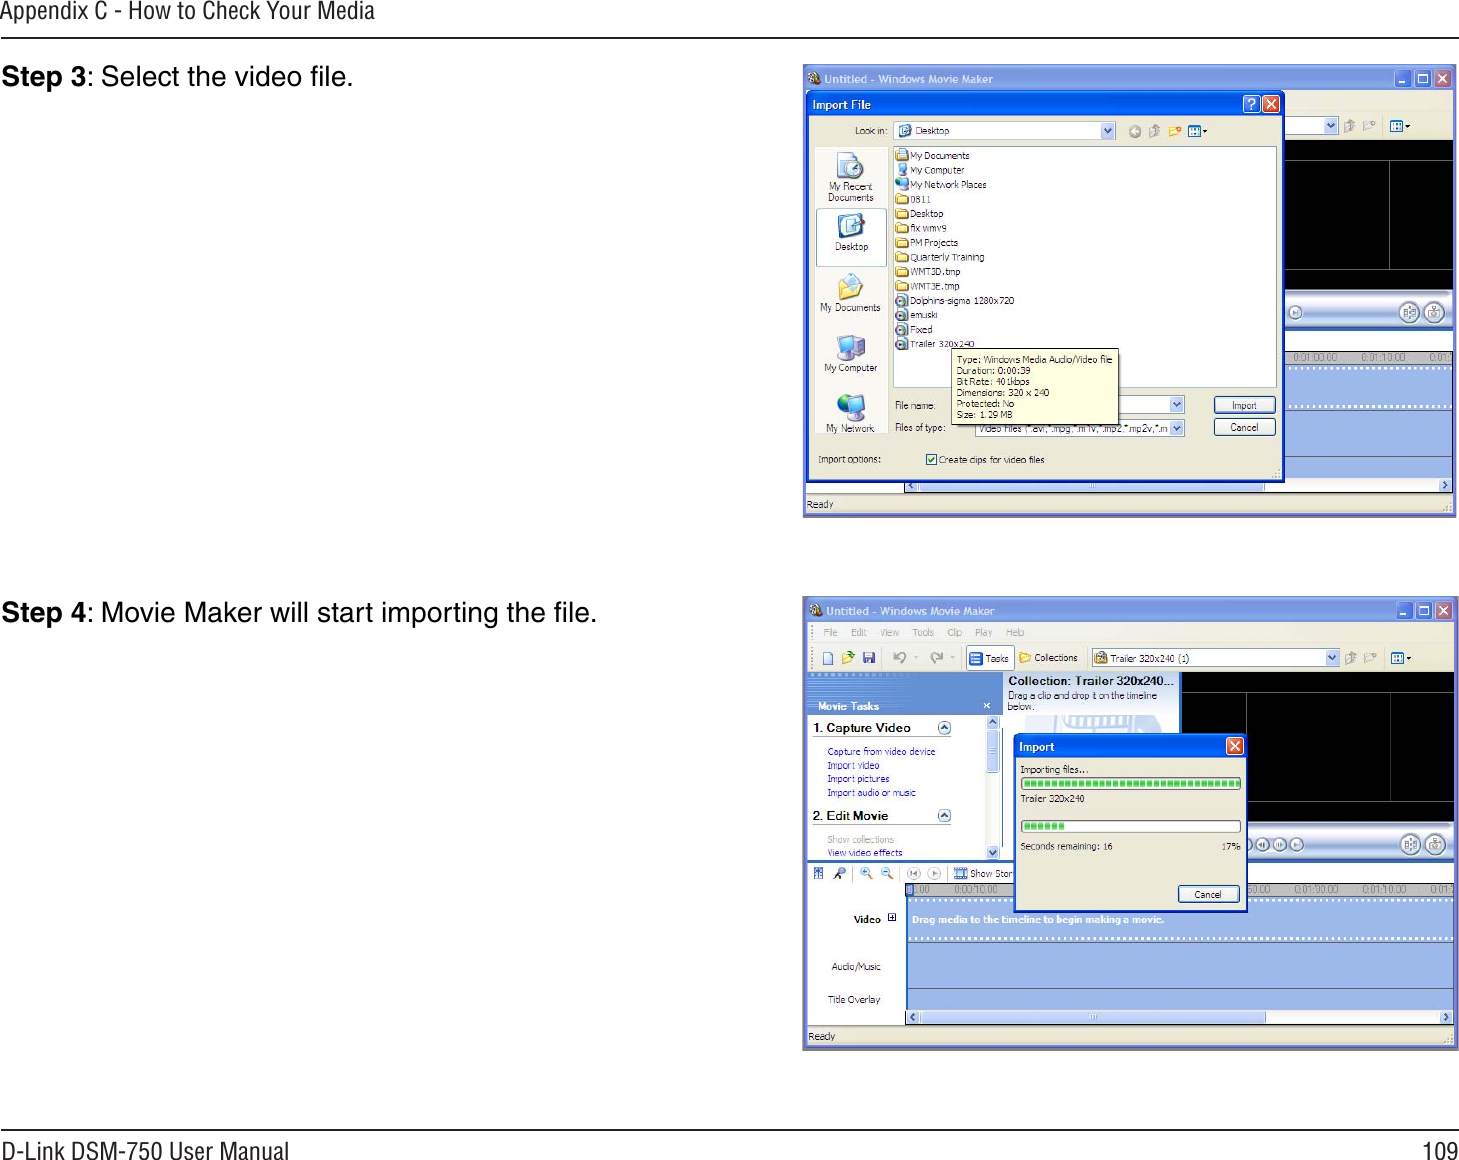 109D-Link DSM-750 User ManualAppendix C - How to Check Your MediaStep 3: Select the video ﬁle.Step 4: Movie Maker will start importing the ﬁle.